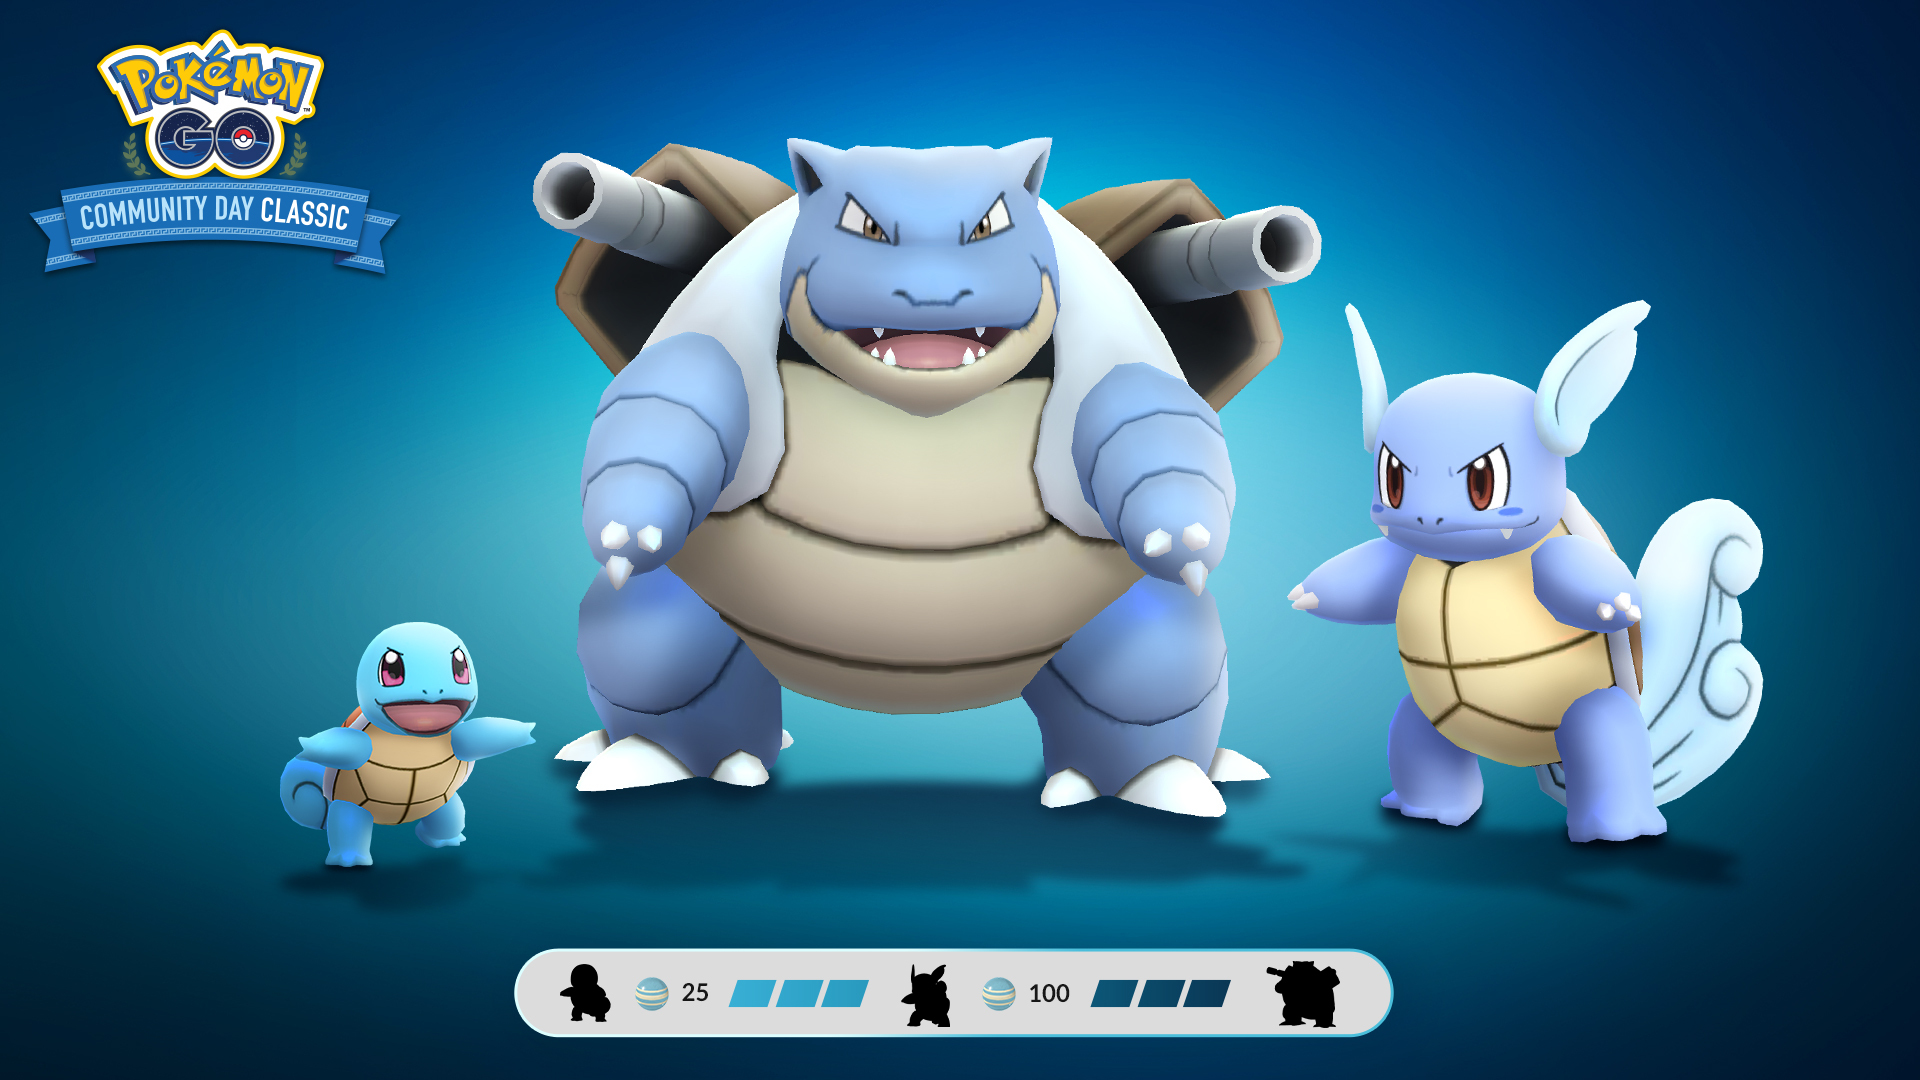 All Squirtle Community Day Classic exclusive Special Research tasks and